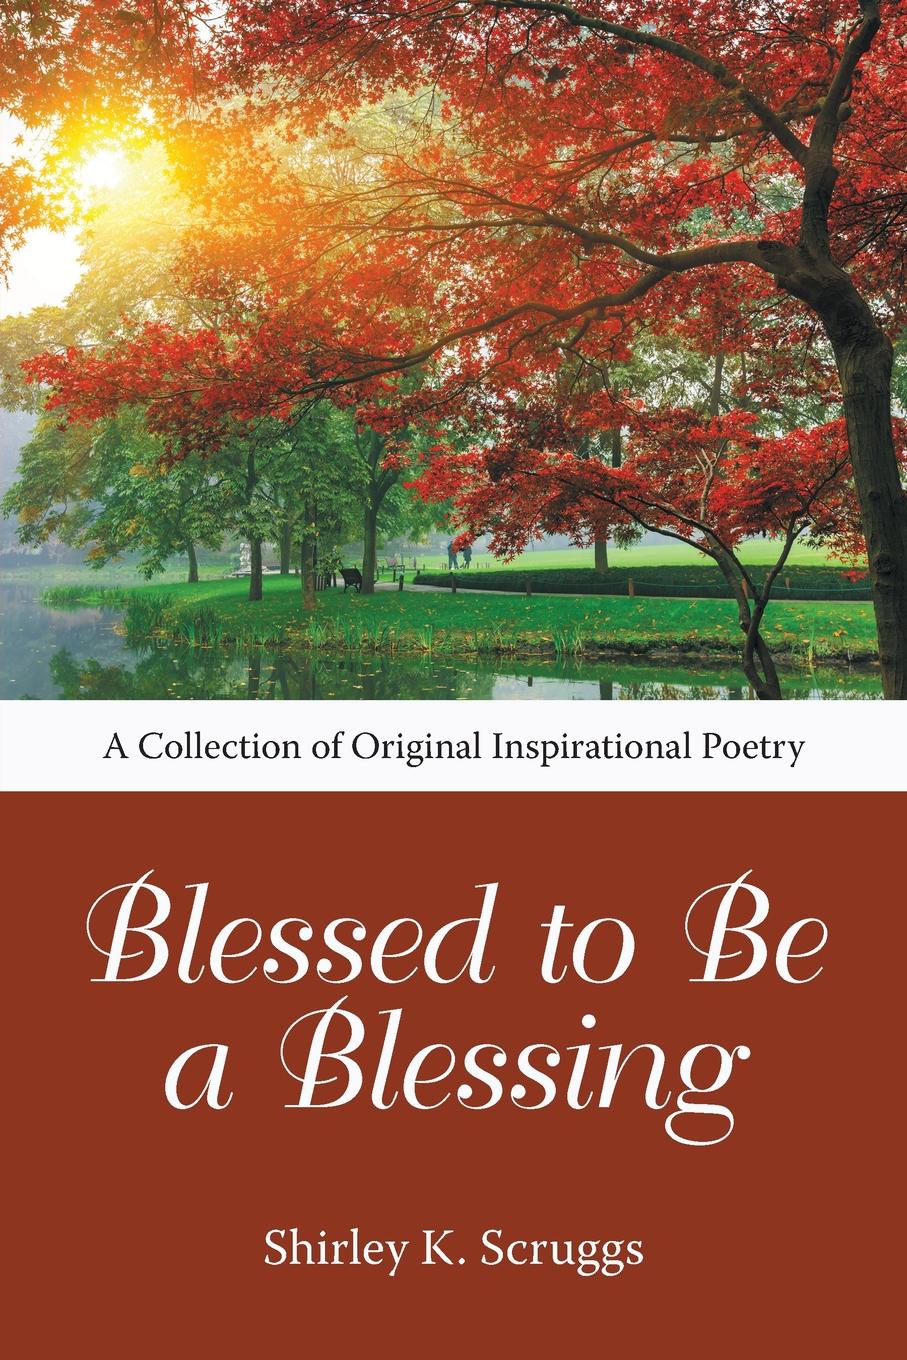 Blessed to Be a Blessing. A Collection of Original Inspirational Poetry